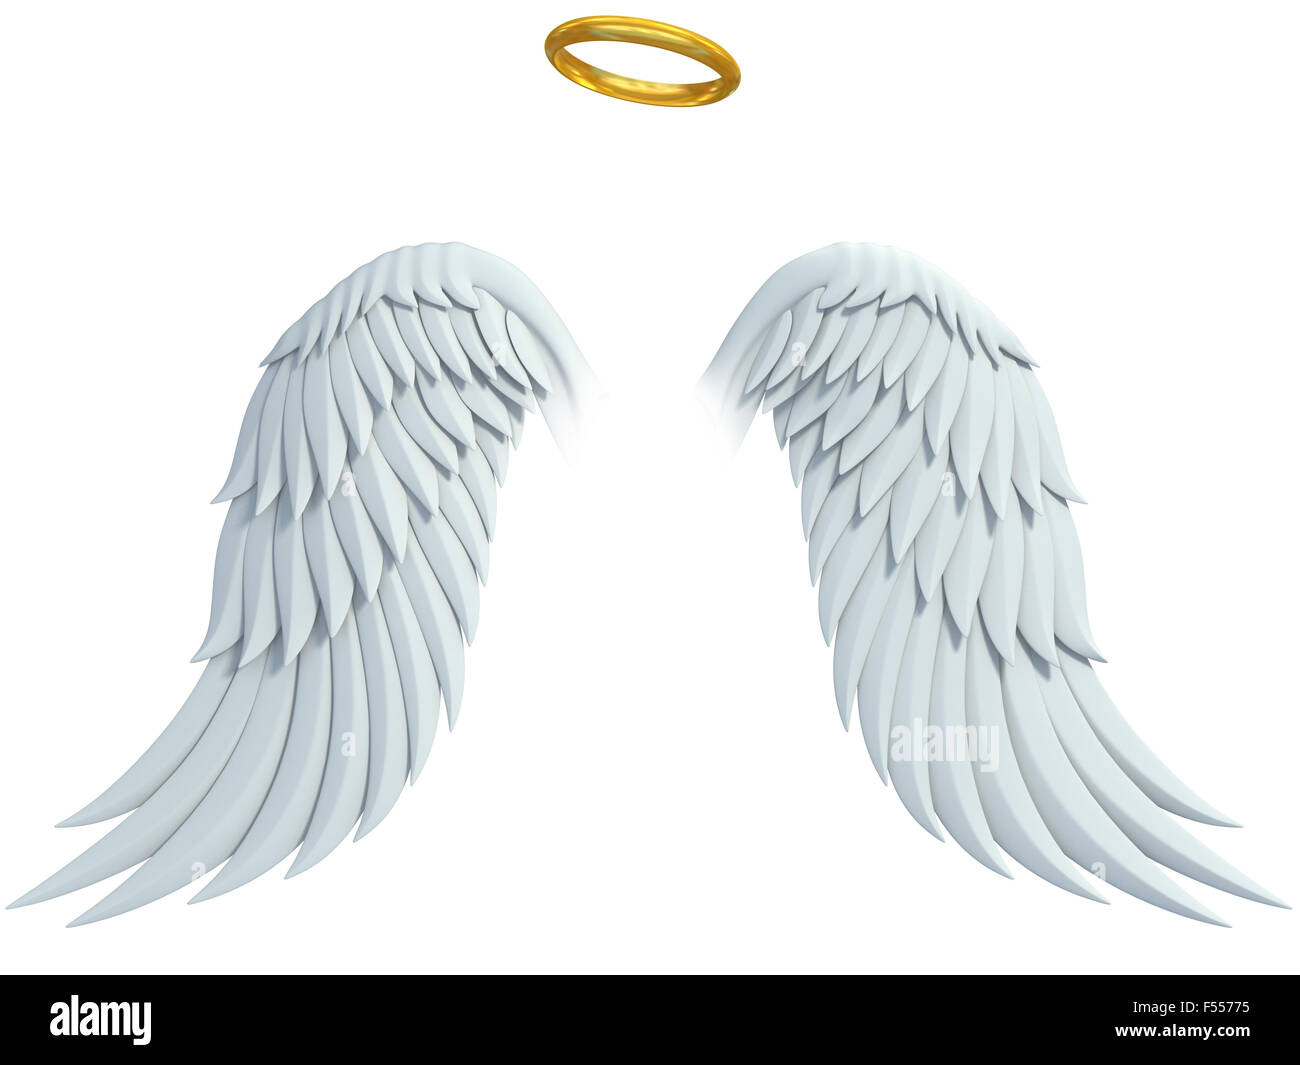 angel design elements - wings and golden halo isolated on the white background Stock Photo